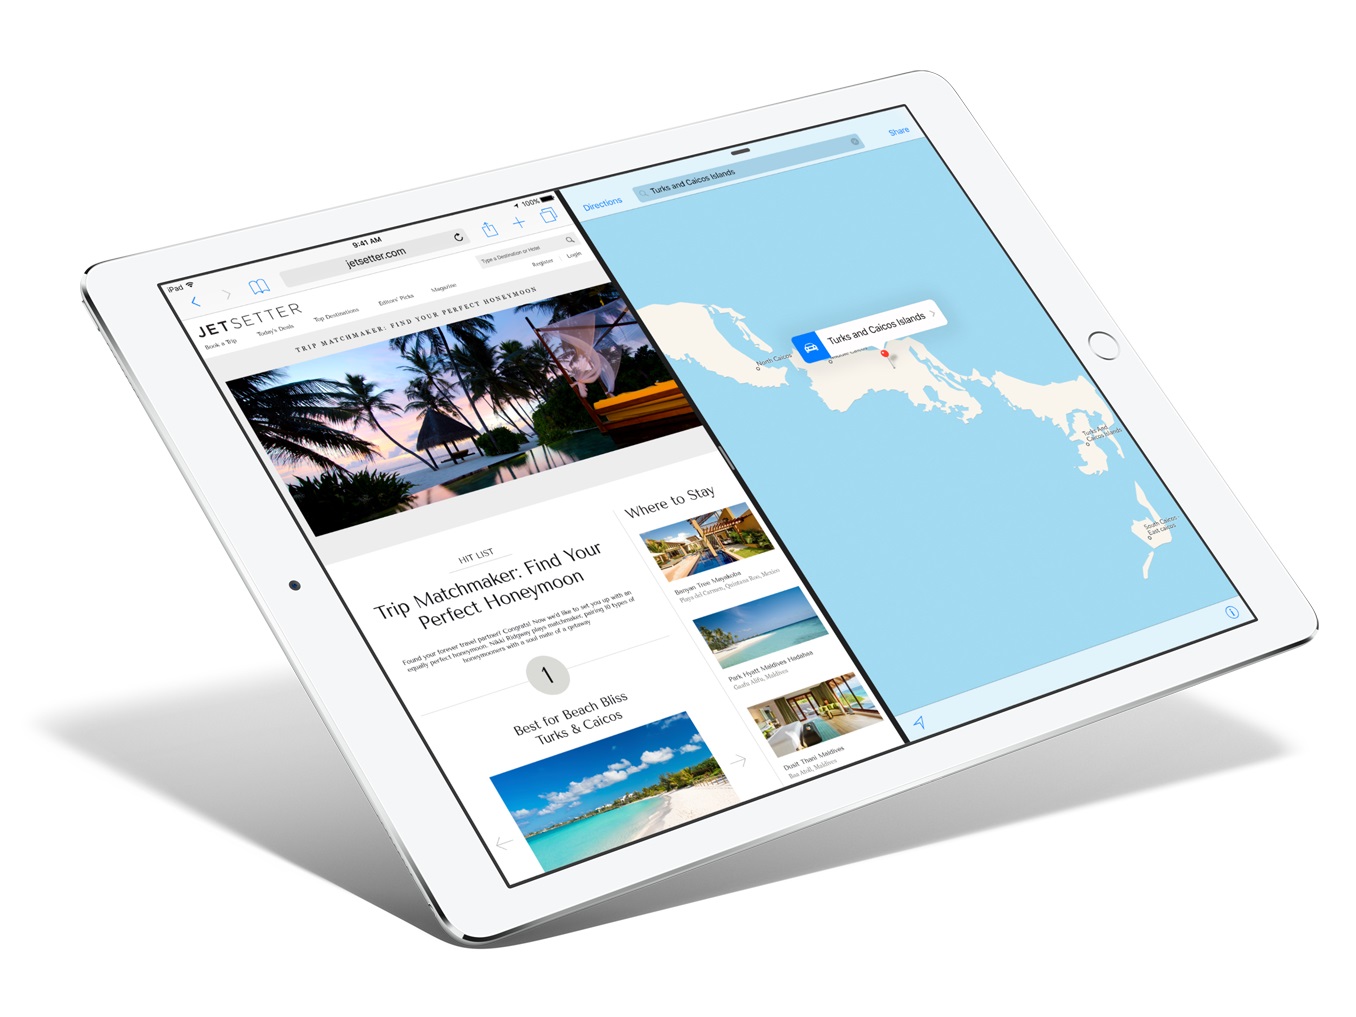 Apple iPad Mini 4 coming with A8 processor and 2 GB RAM - NotebookCheck